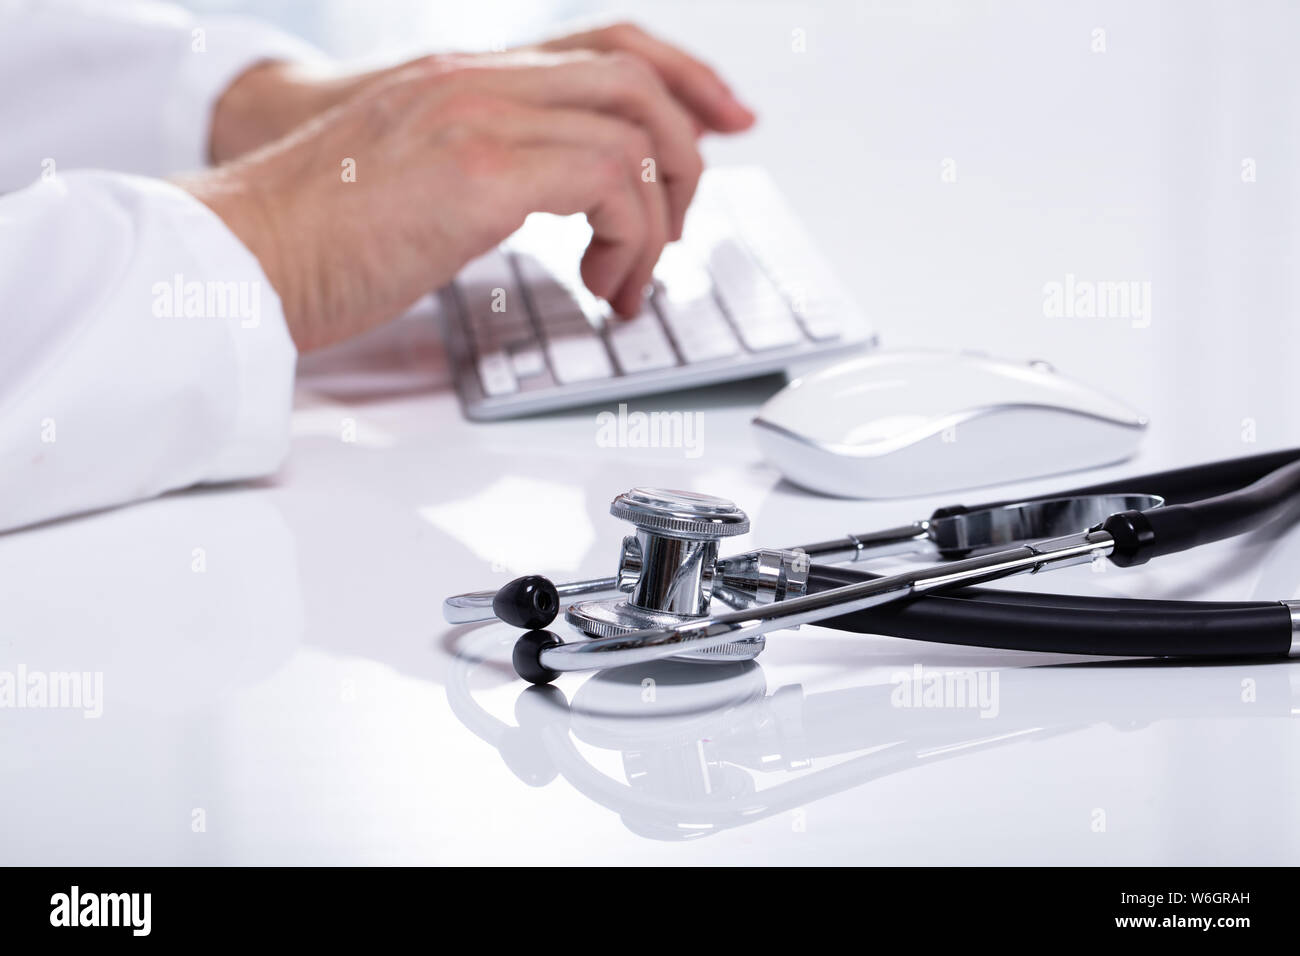 Close-up Of Stethoscope On White Desk Besides Doctor Typing On Wireless Keyboard Stock Photo